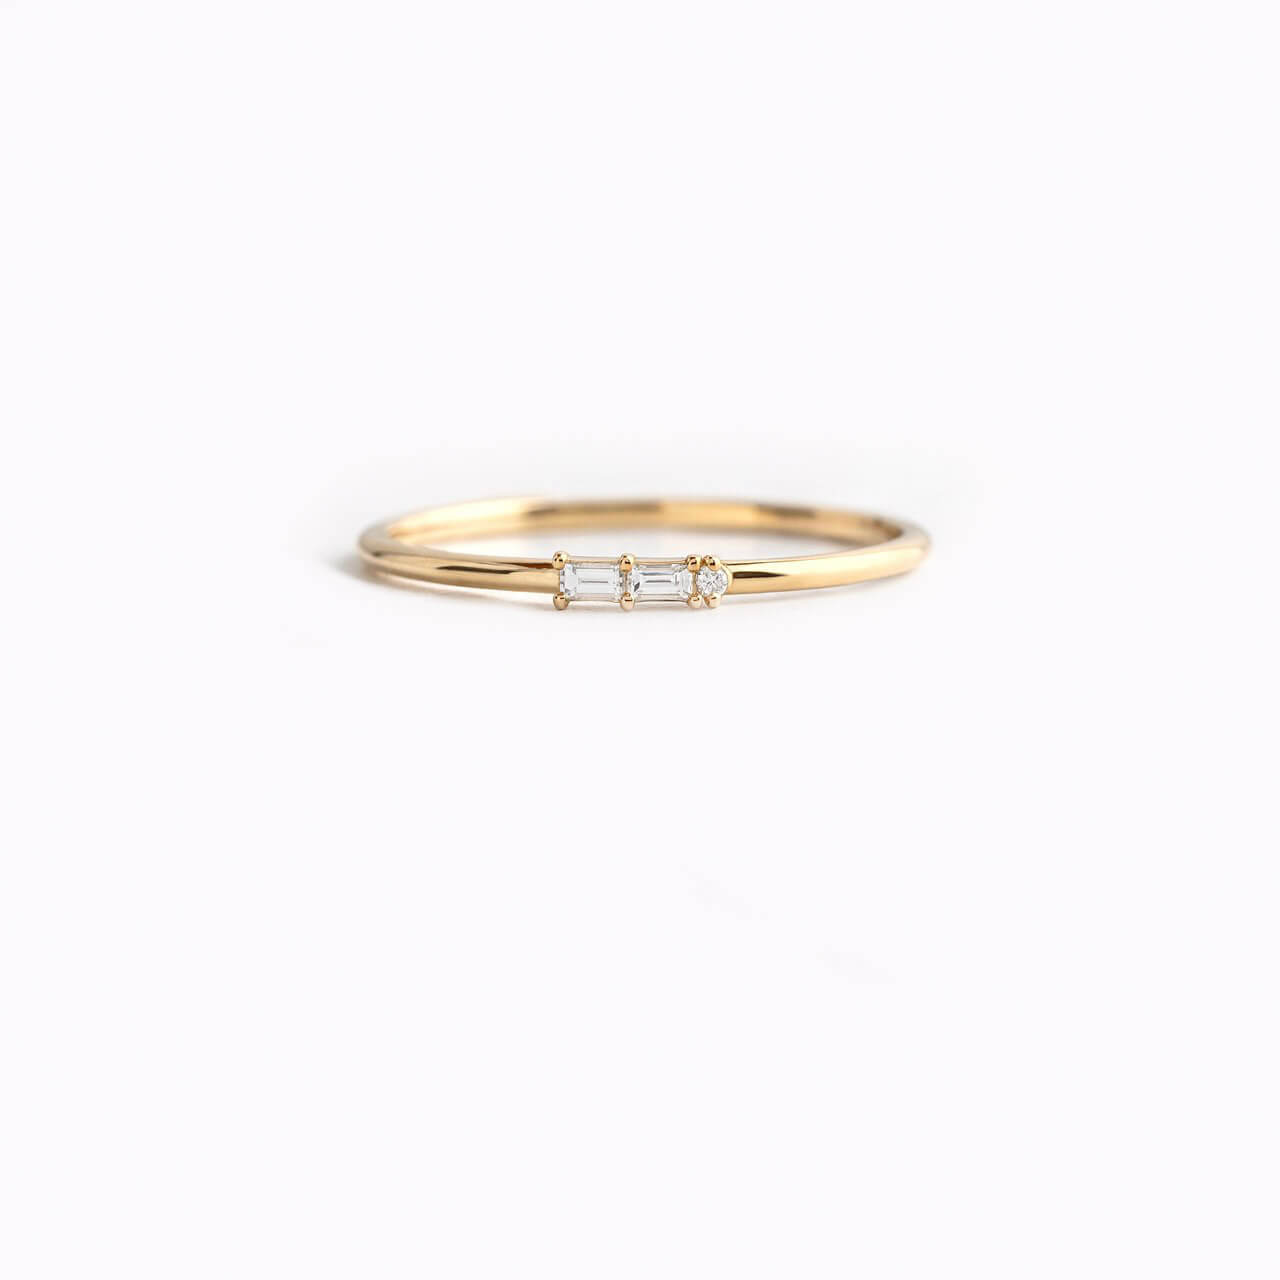 Morse Code Ring, Yellow Gold - Letter "G"